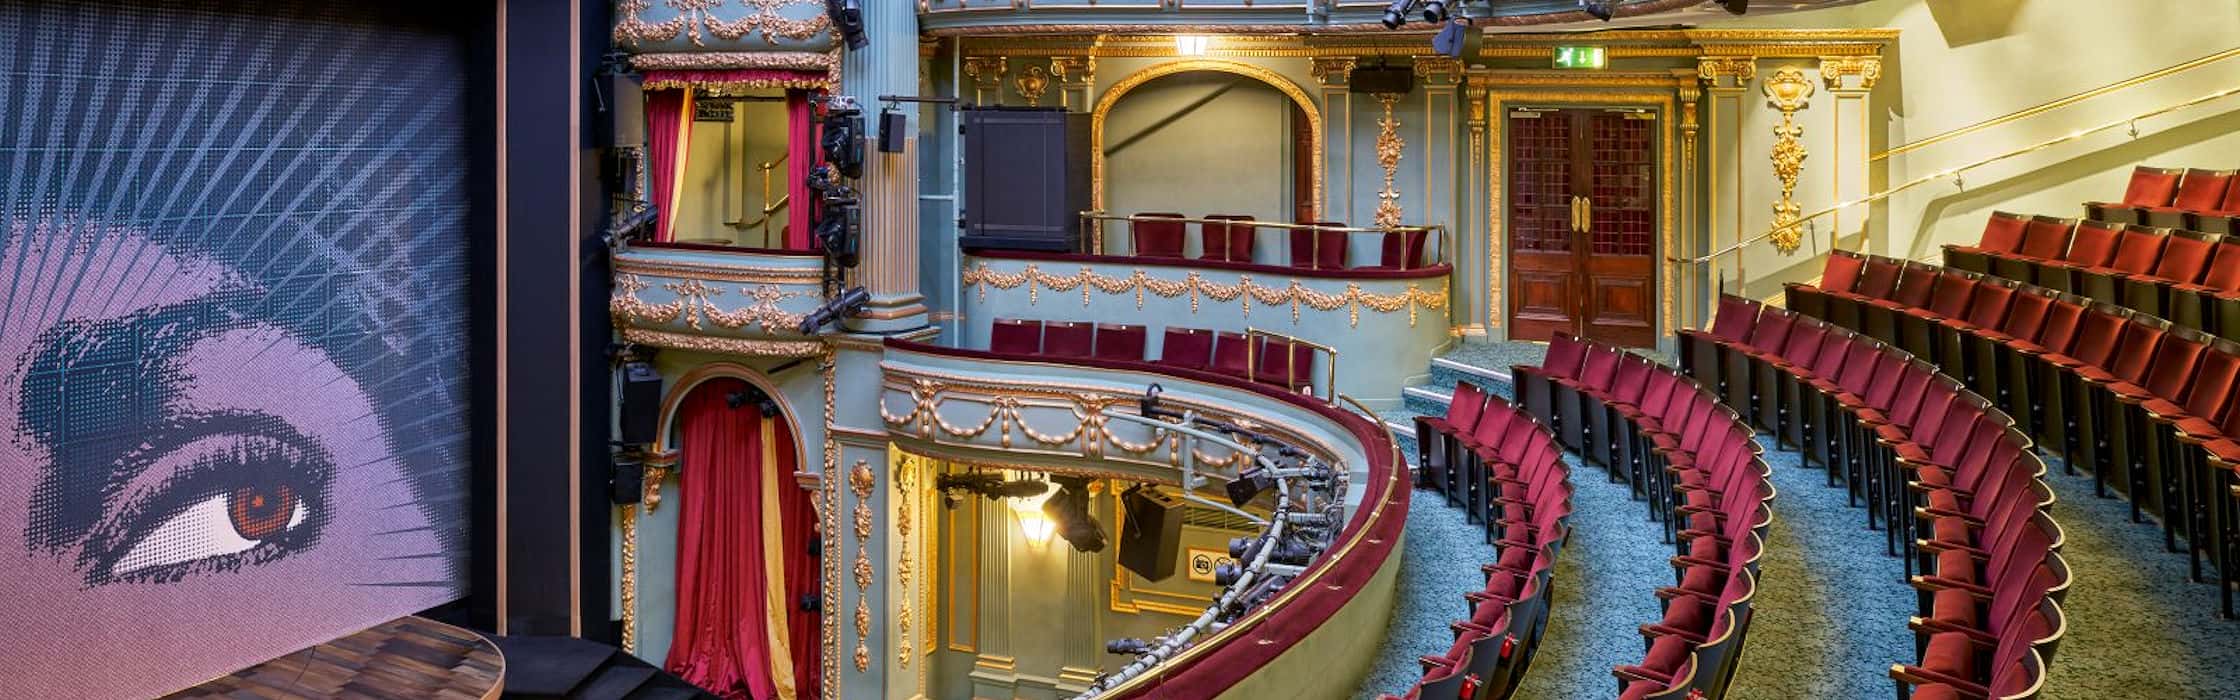 What's On at The Aldwych Theatre, London